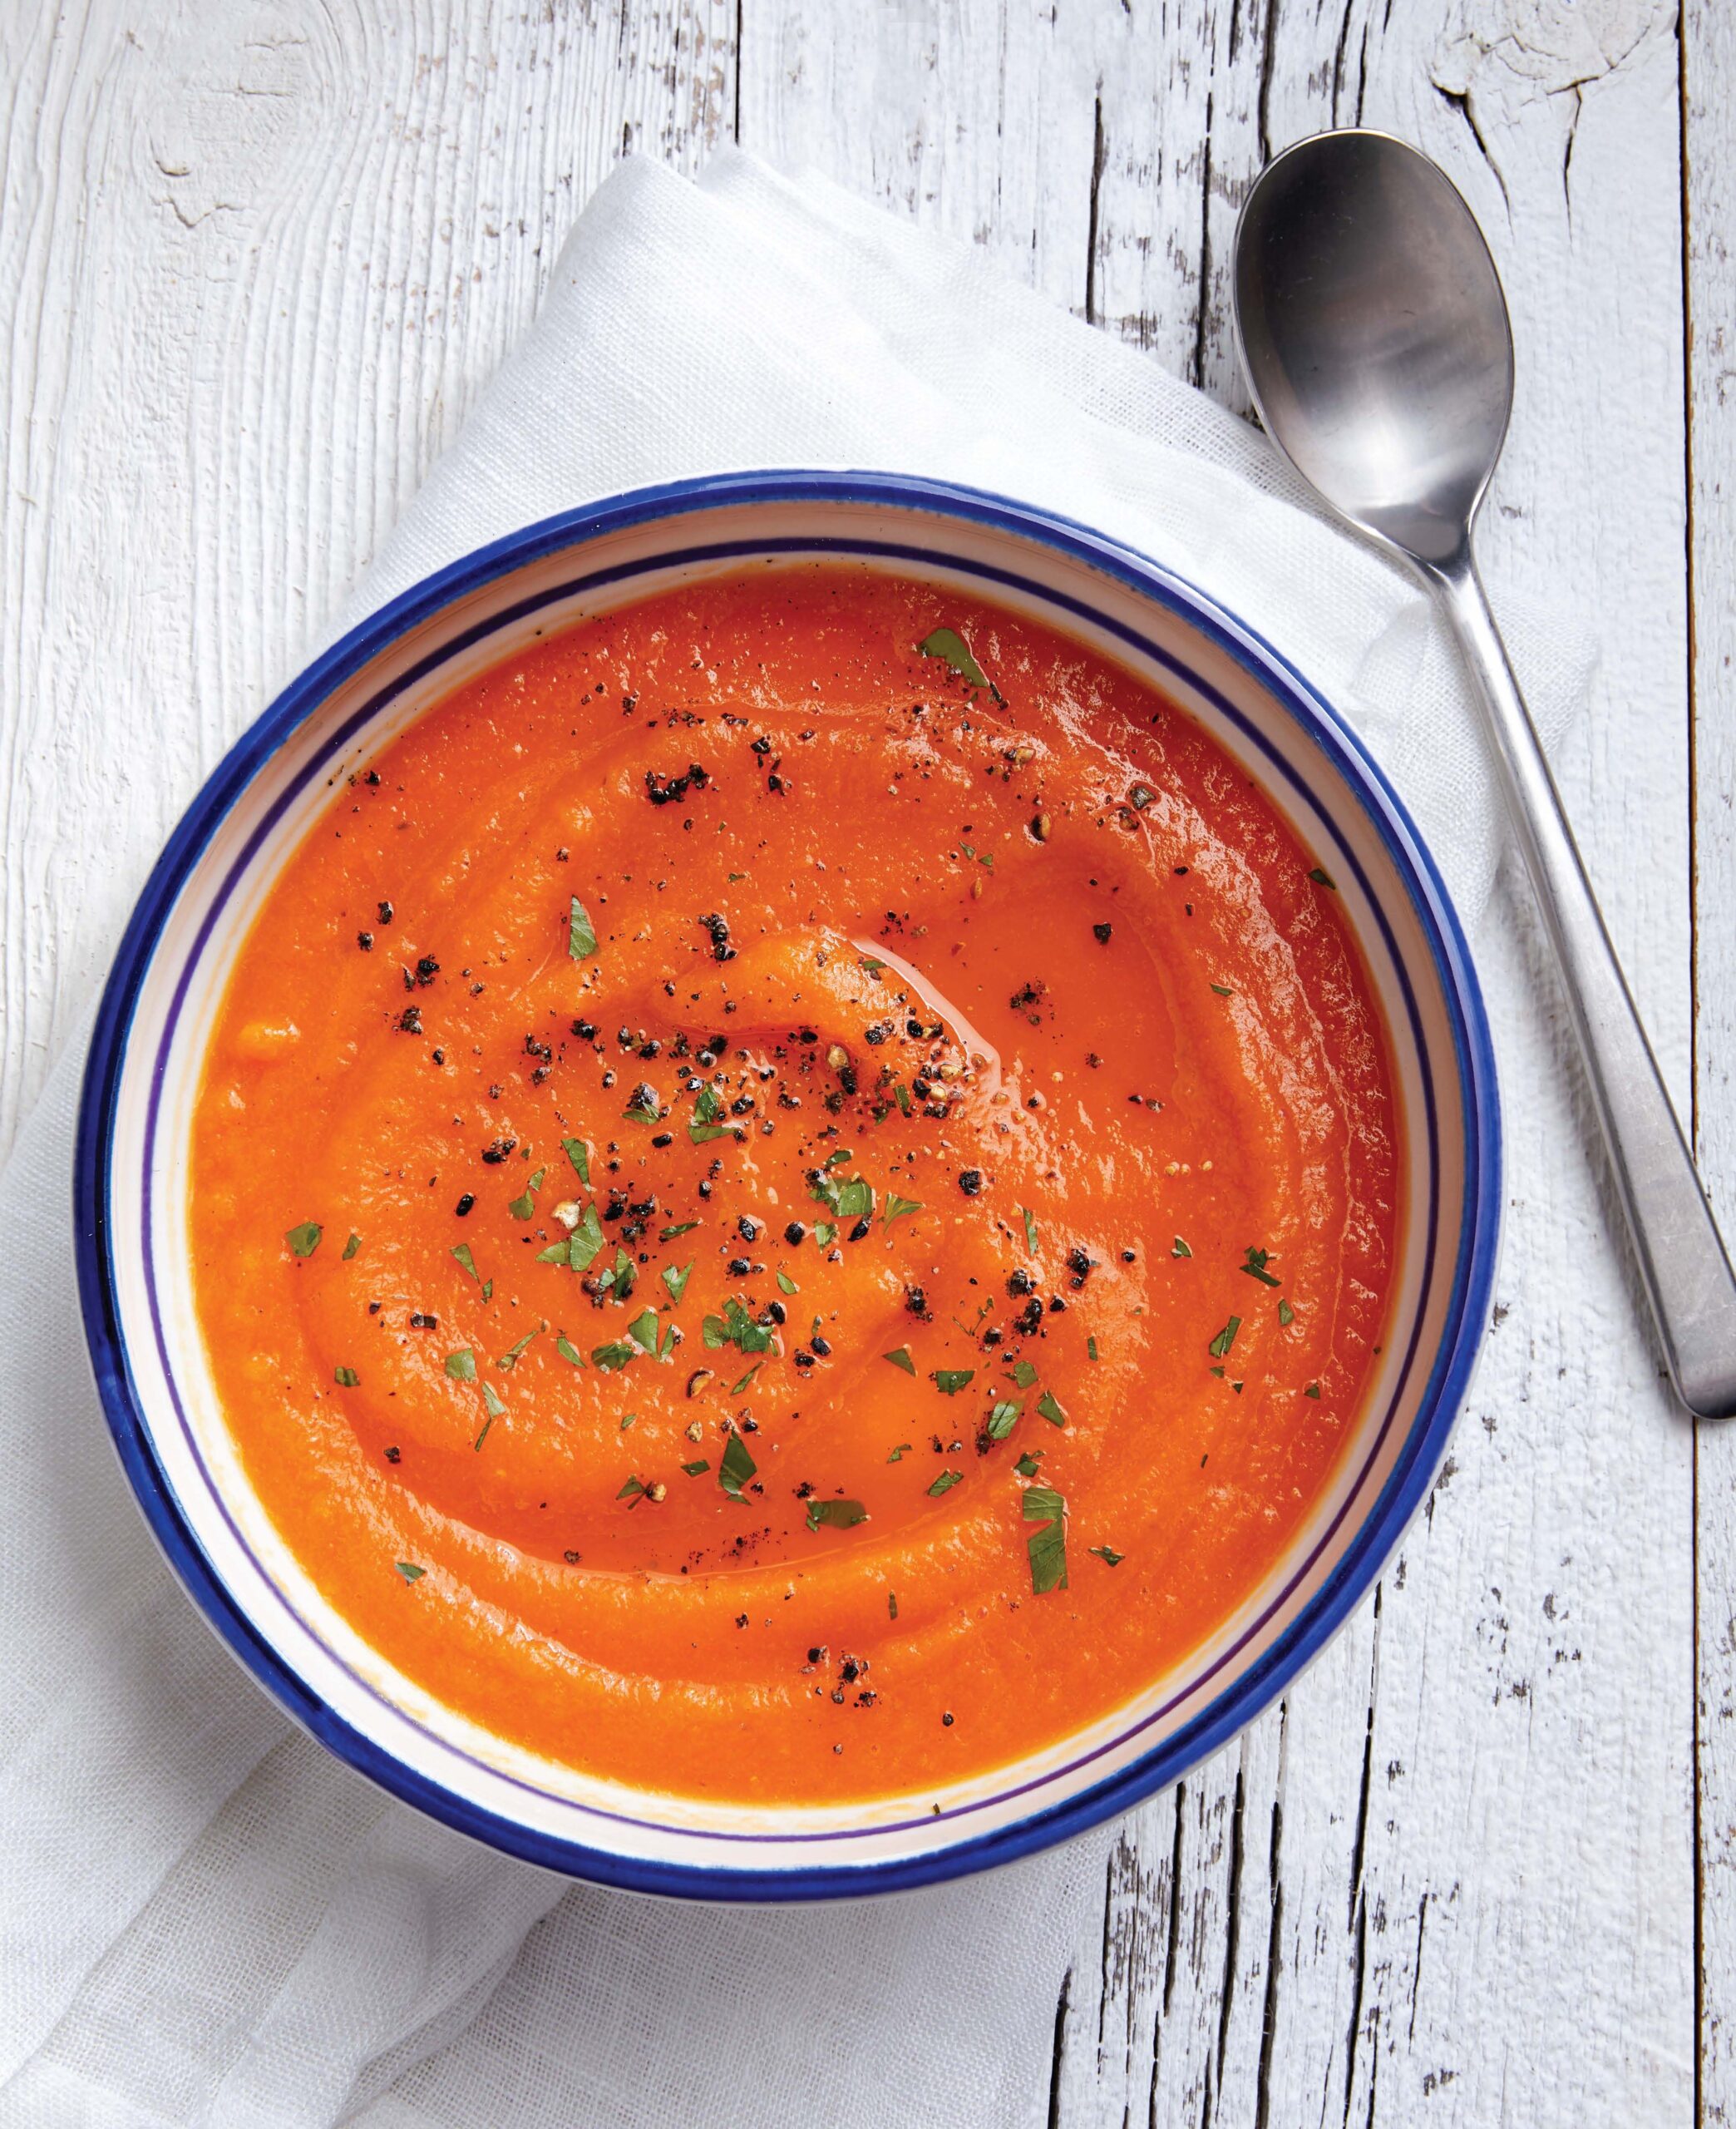 Healthy Ginger Carrot Soup Recipe